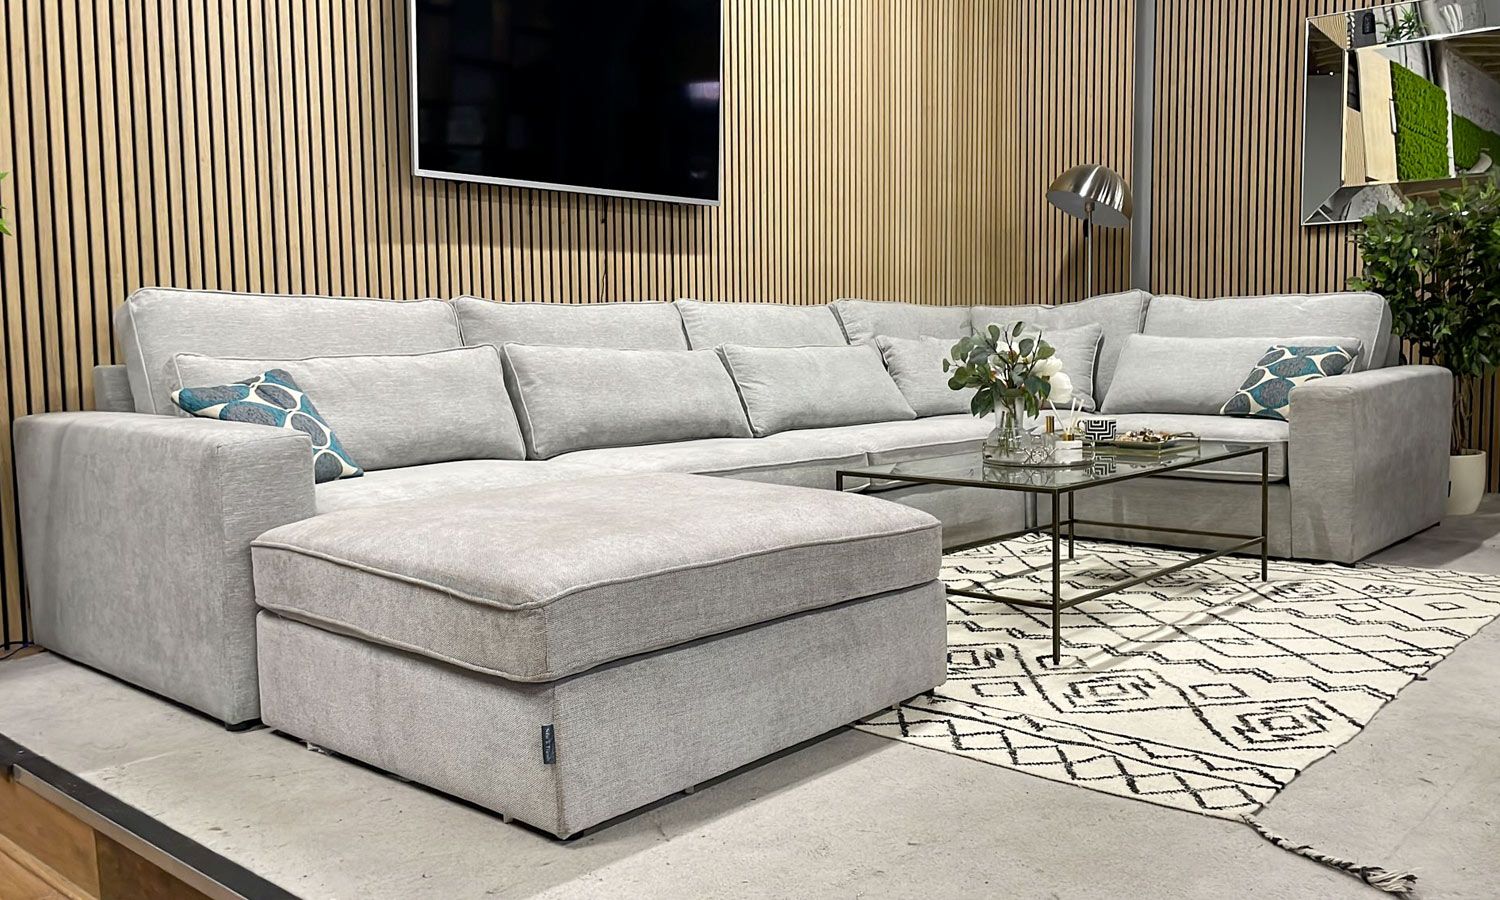 Navagio Light Grey Ascot Fabric U Shaped Sofa – Sofas & Friends Within Sofas In Light Grey (View 7 of 15)